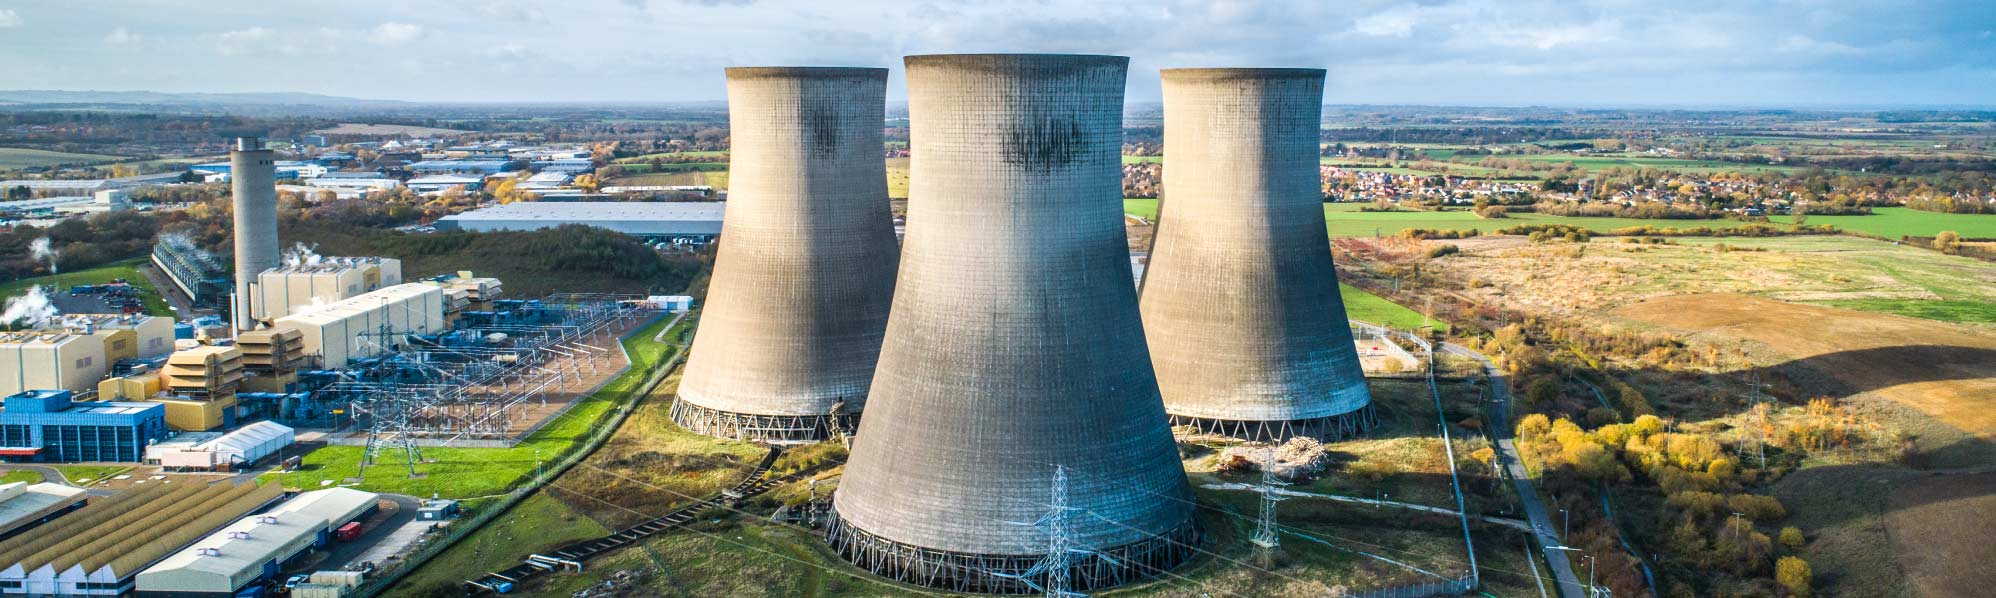 A picture of 3 nuclear cooling towers